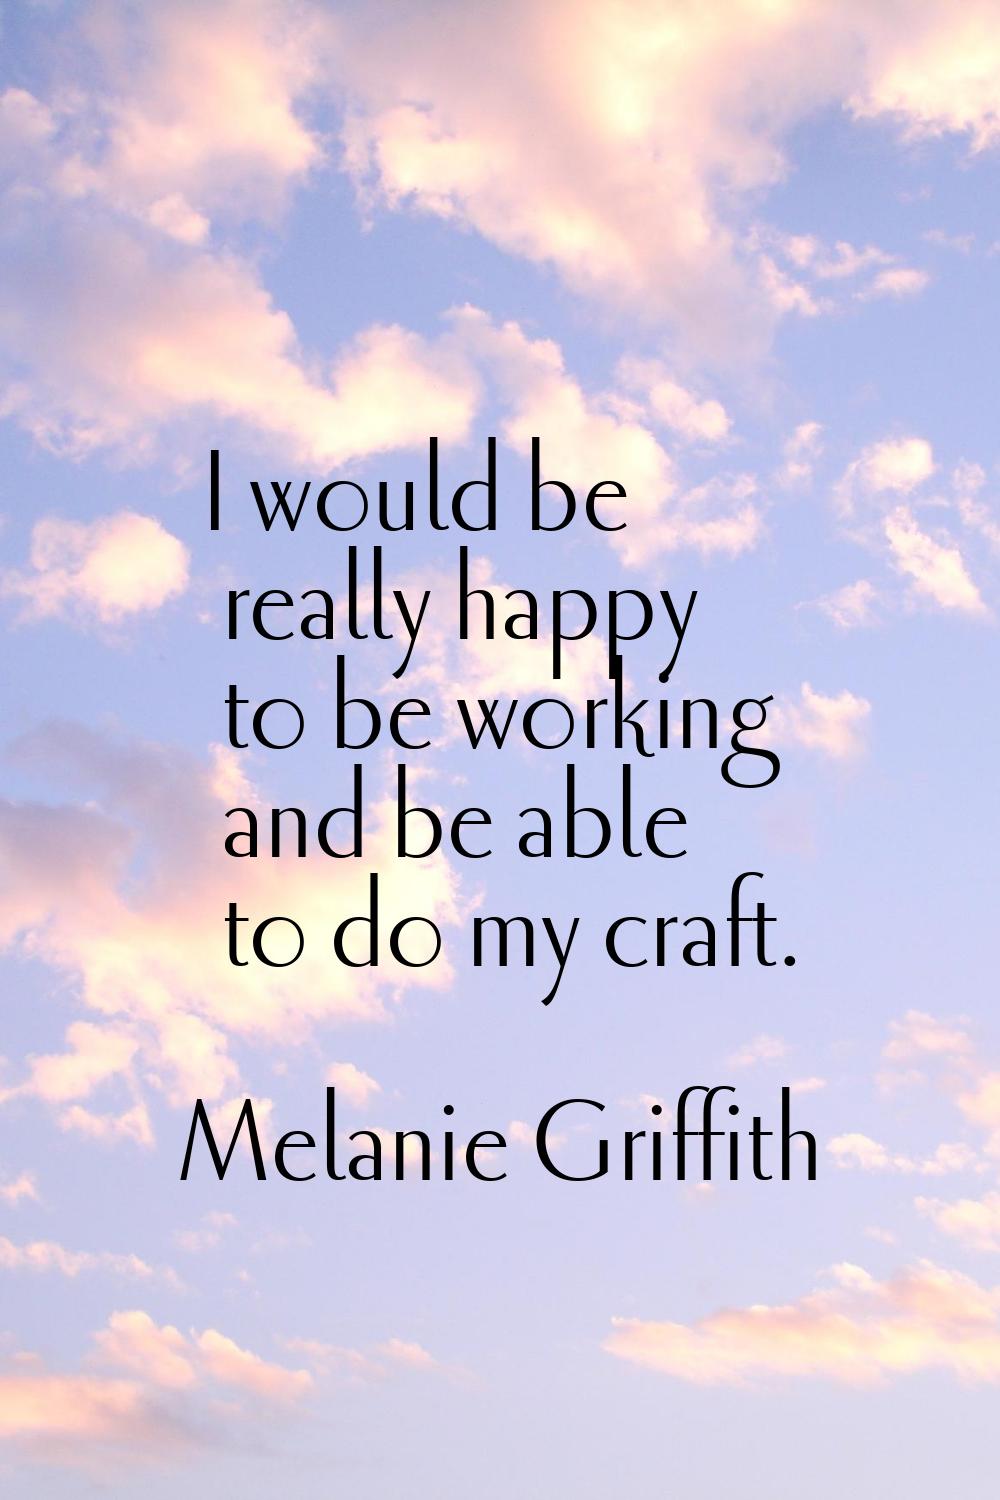 I would be really happy to be working and be able to do my craft.